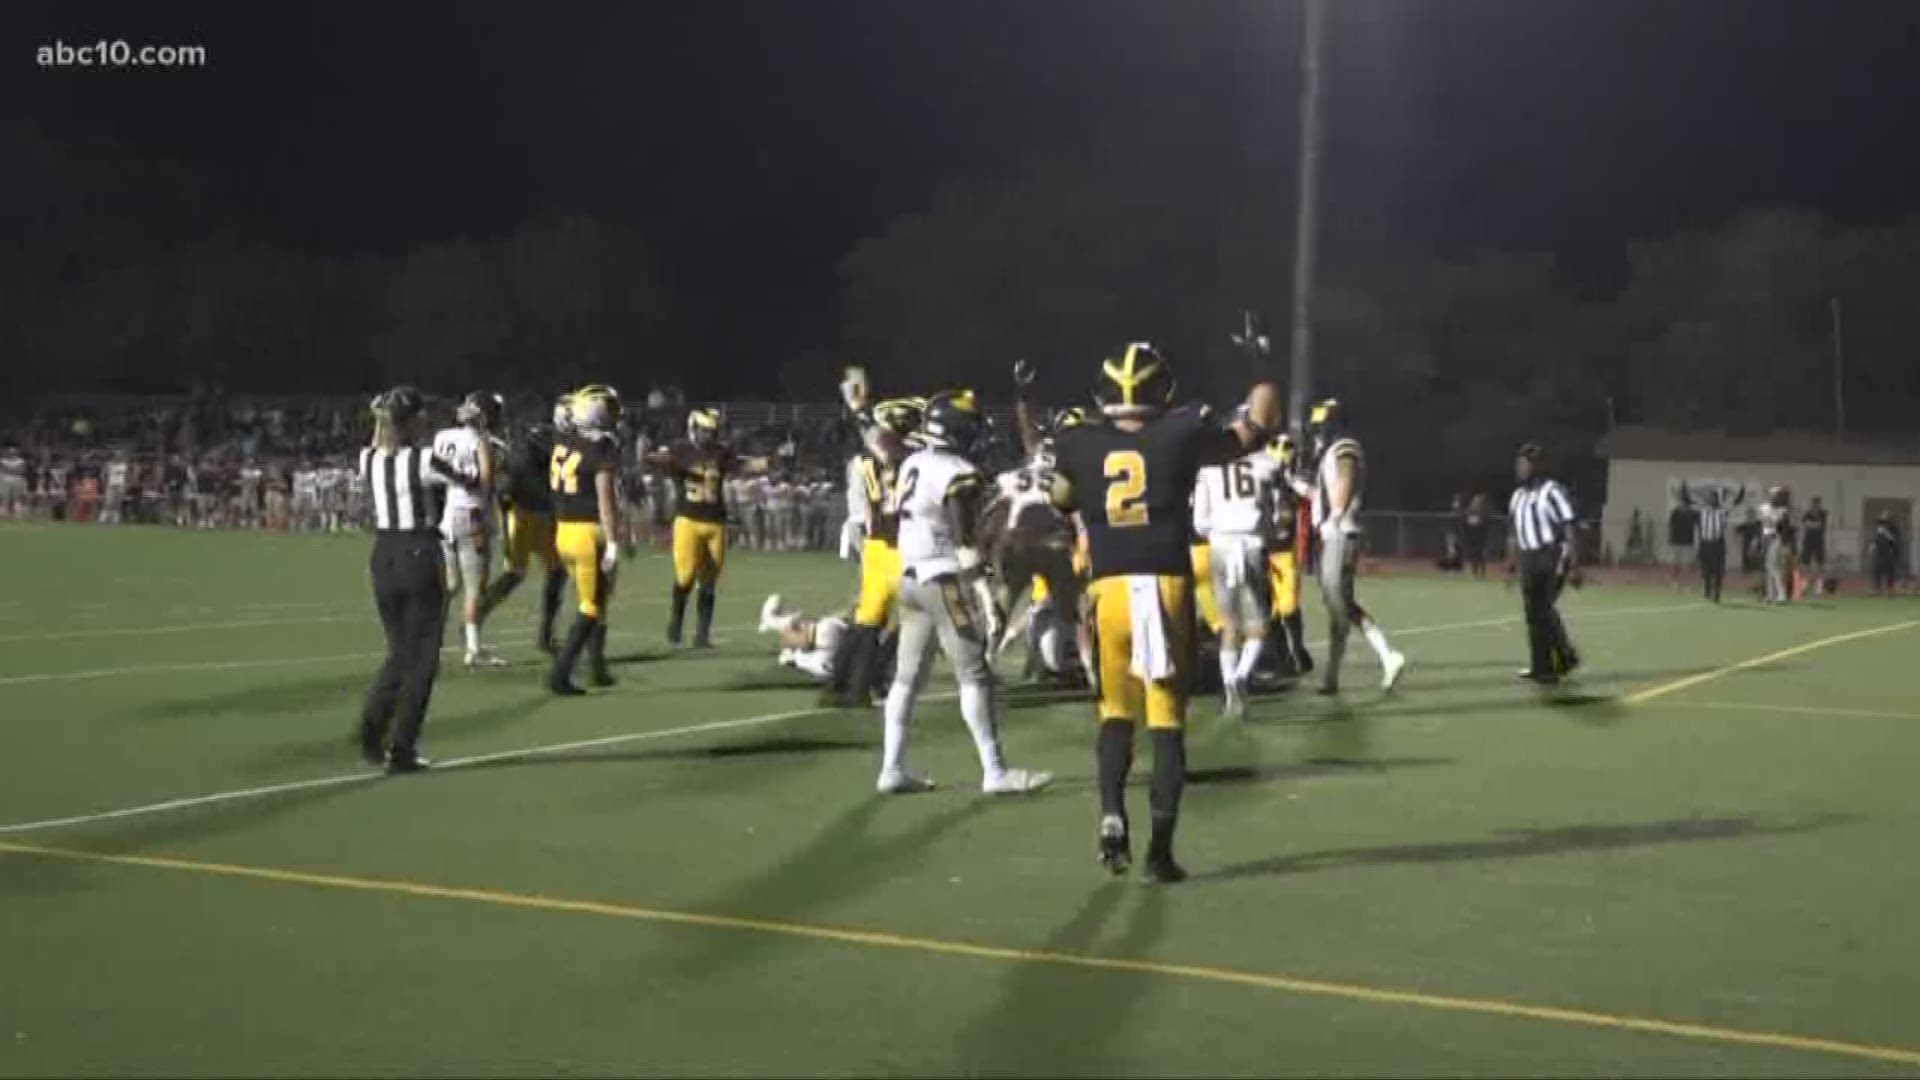 We're in the thick of the high school football season and in just one month we'll be talking playoffs. They were anticipating a playoff atmosphere at Del Oro tonight, as the Golden Eagles hosted Oak Ridge for homecoming. And Johnny "Football" Bartell saw 